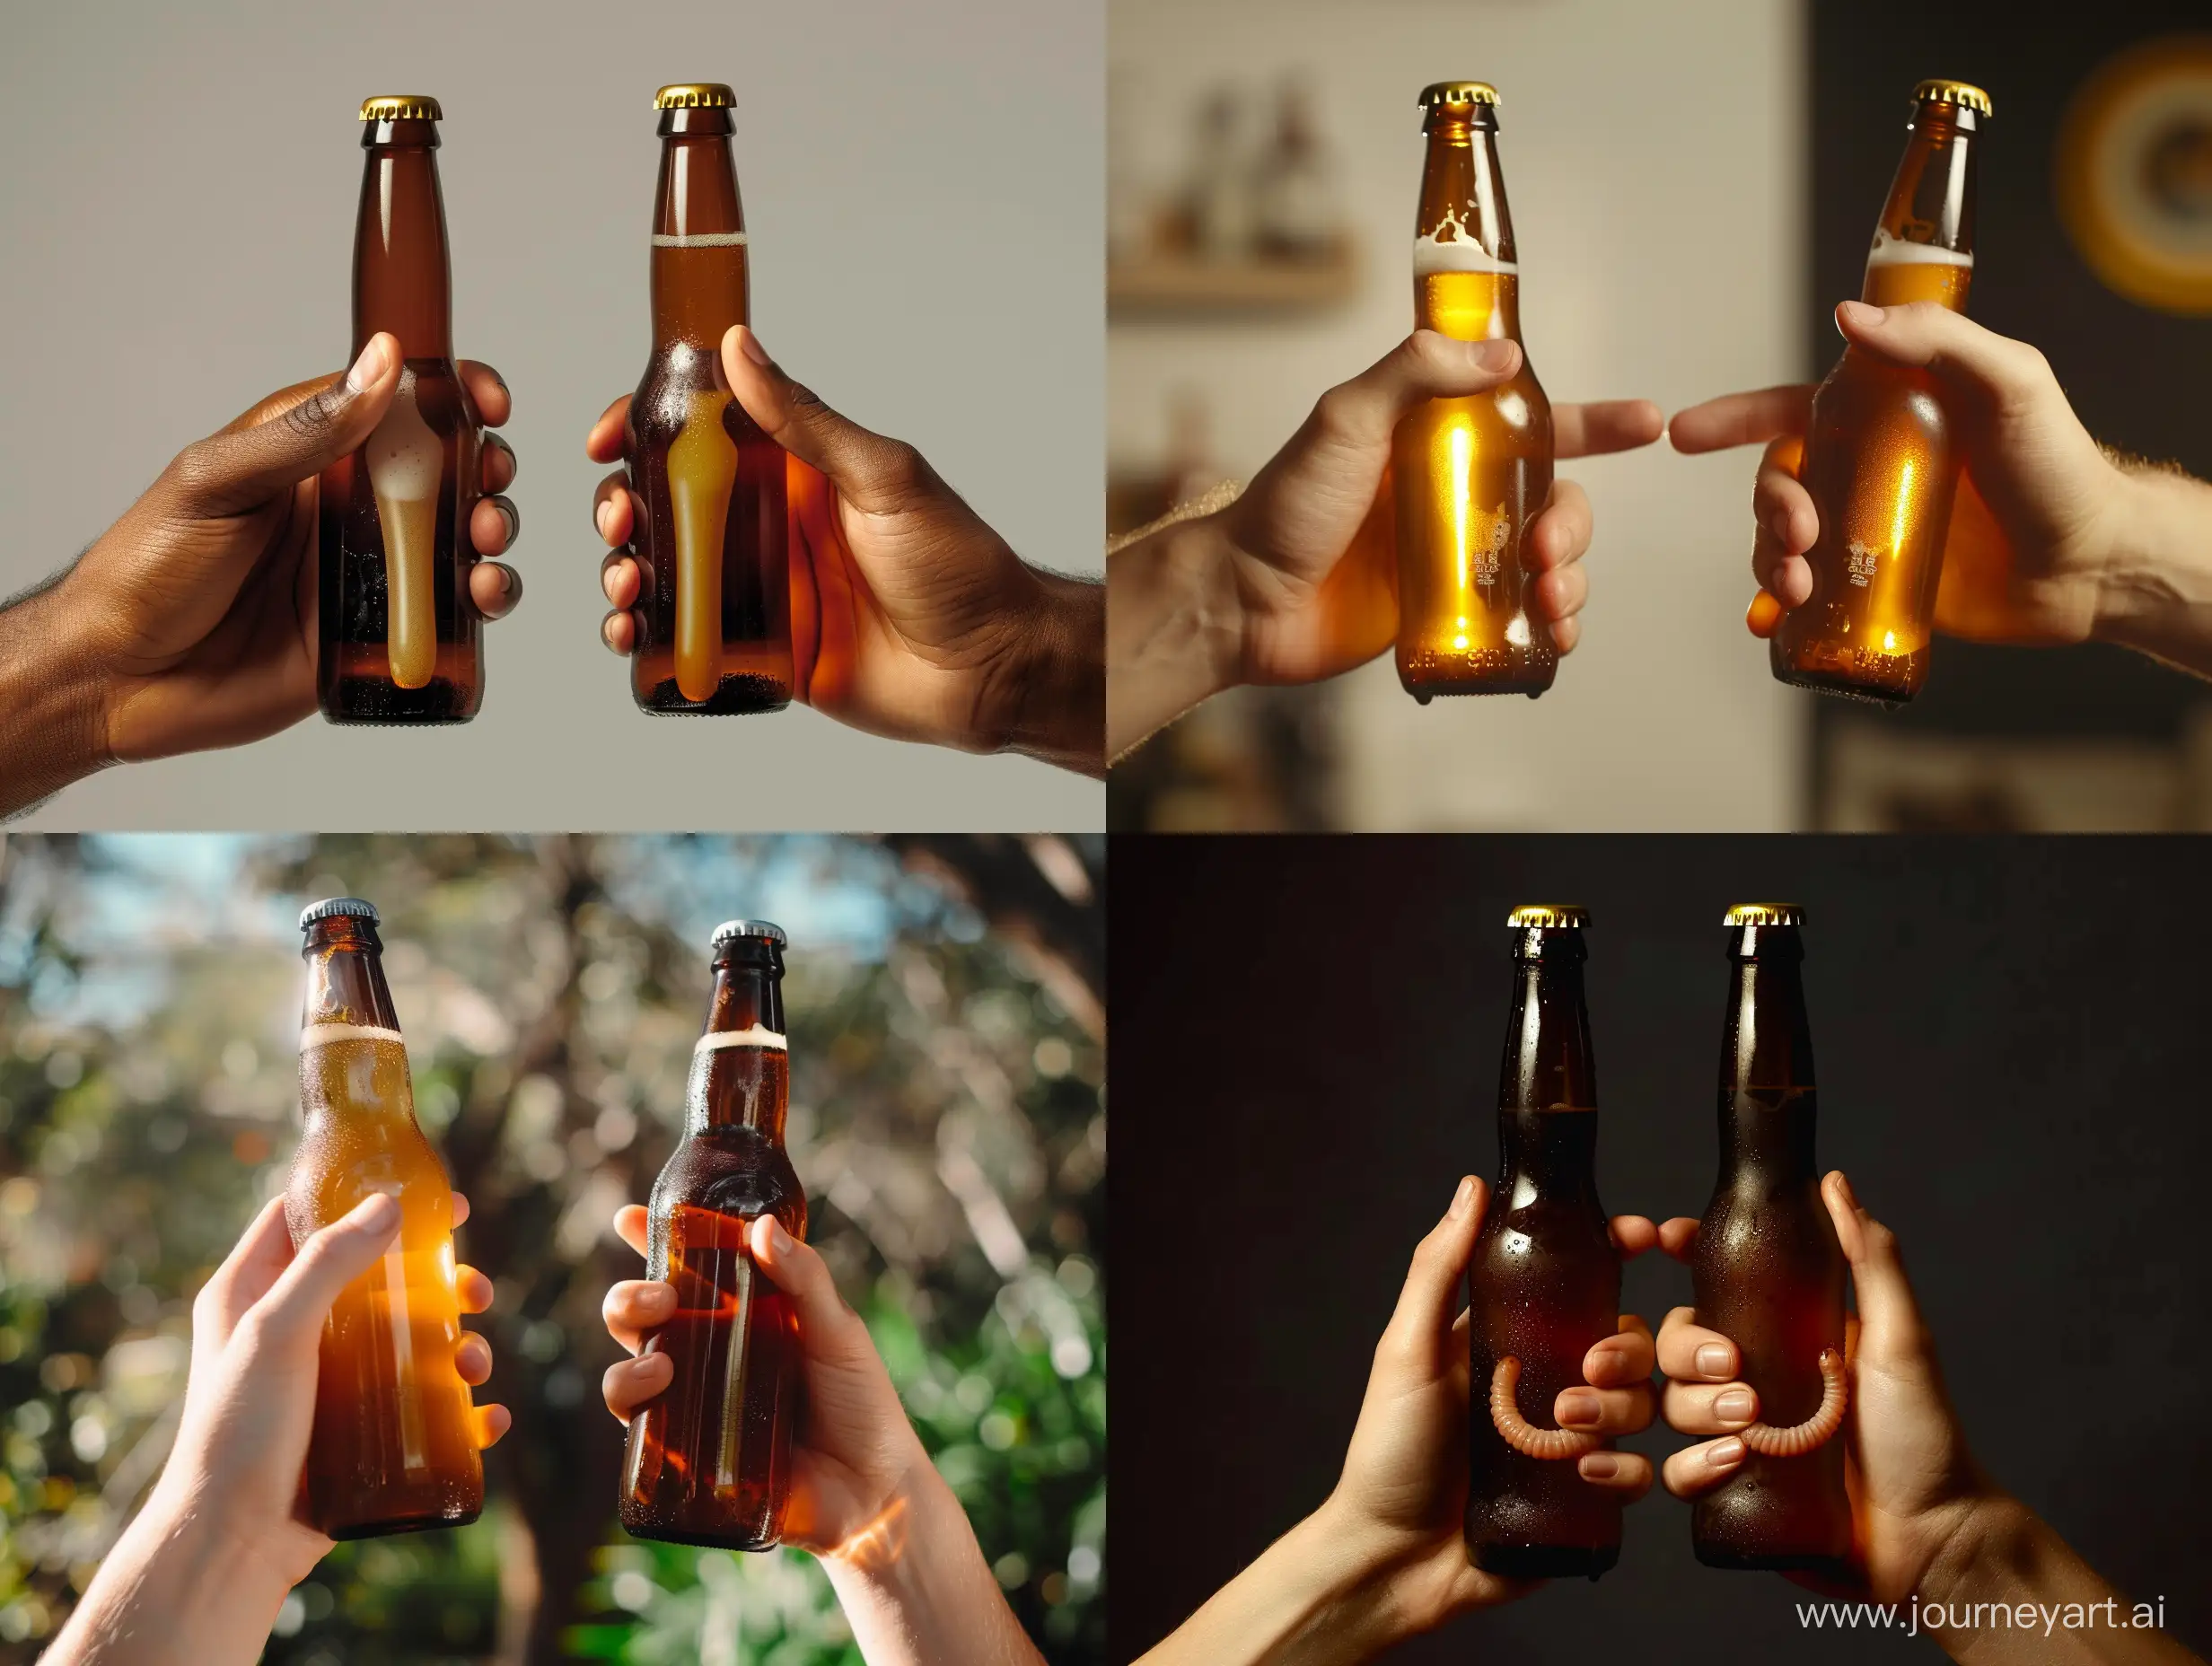 two hands holding a beer bottle in each hand. The nads are criss crossed